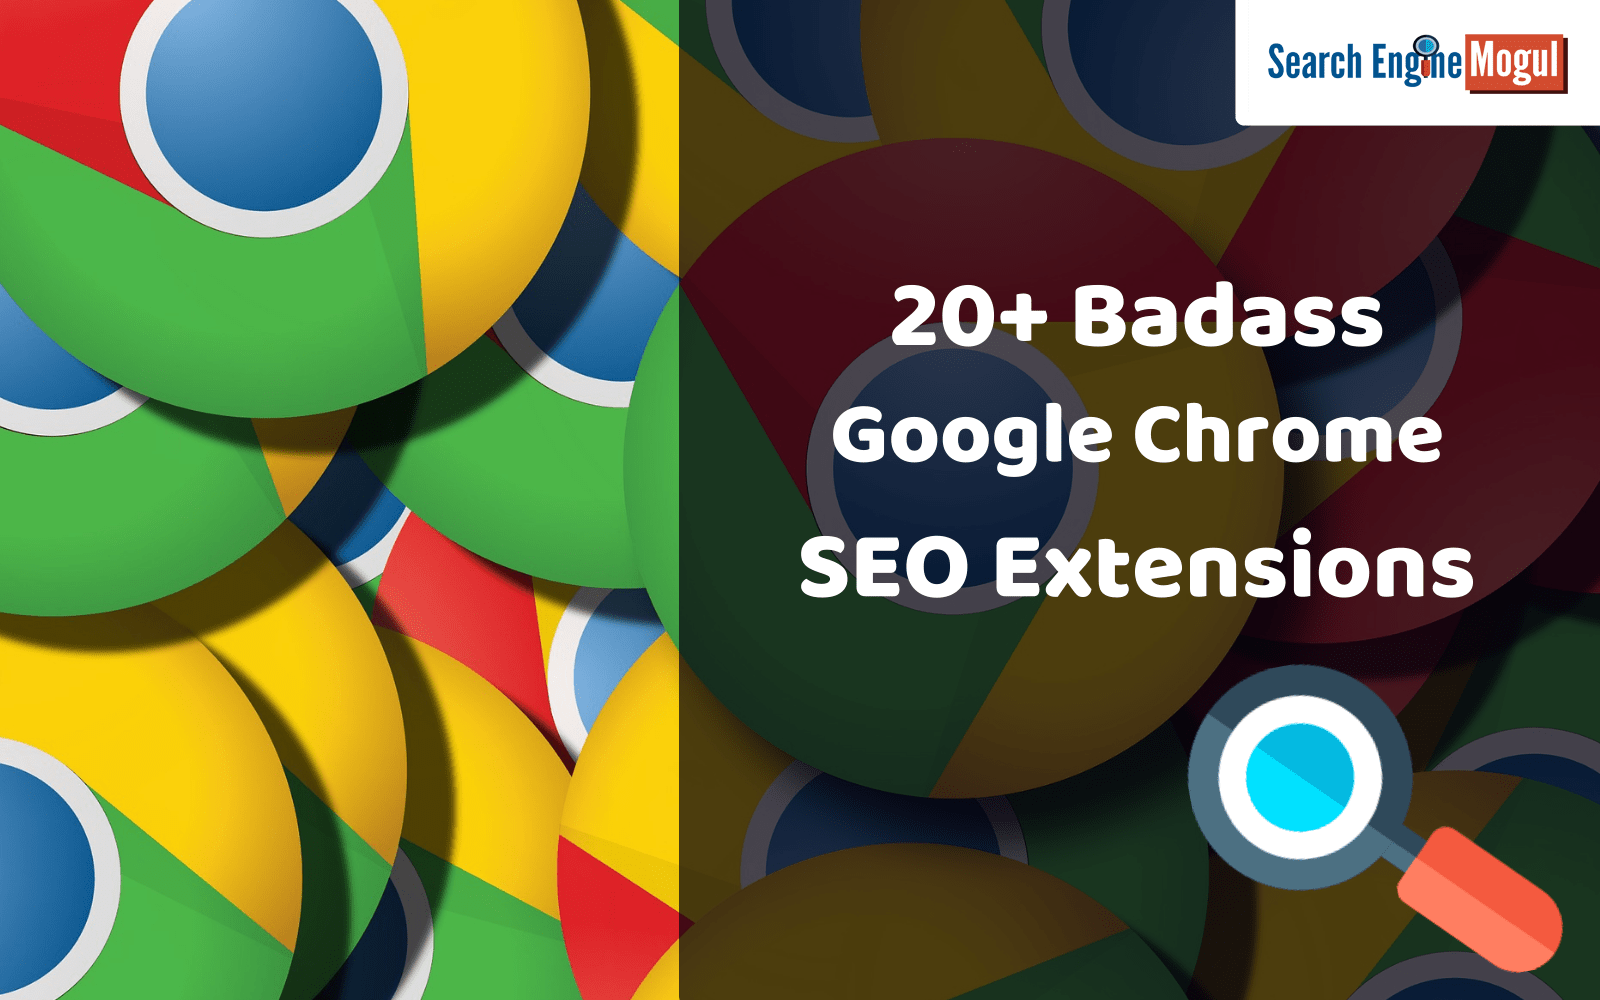 SEO Chrome Extensions